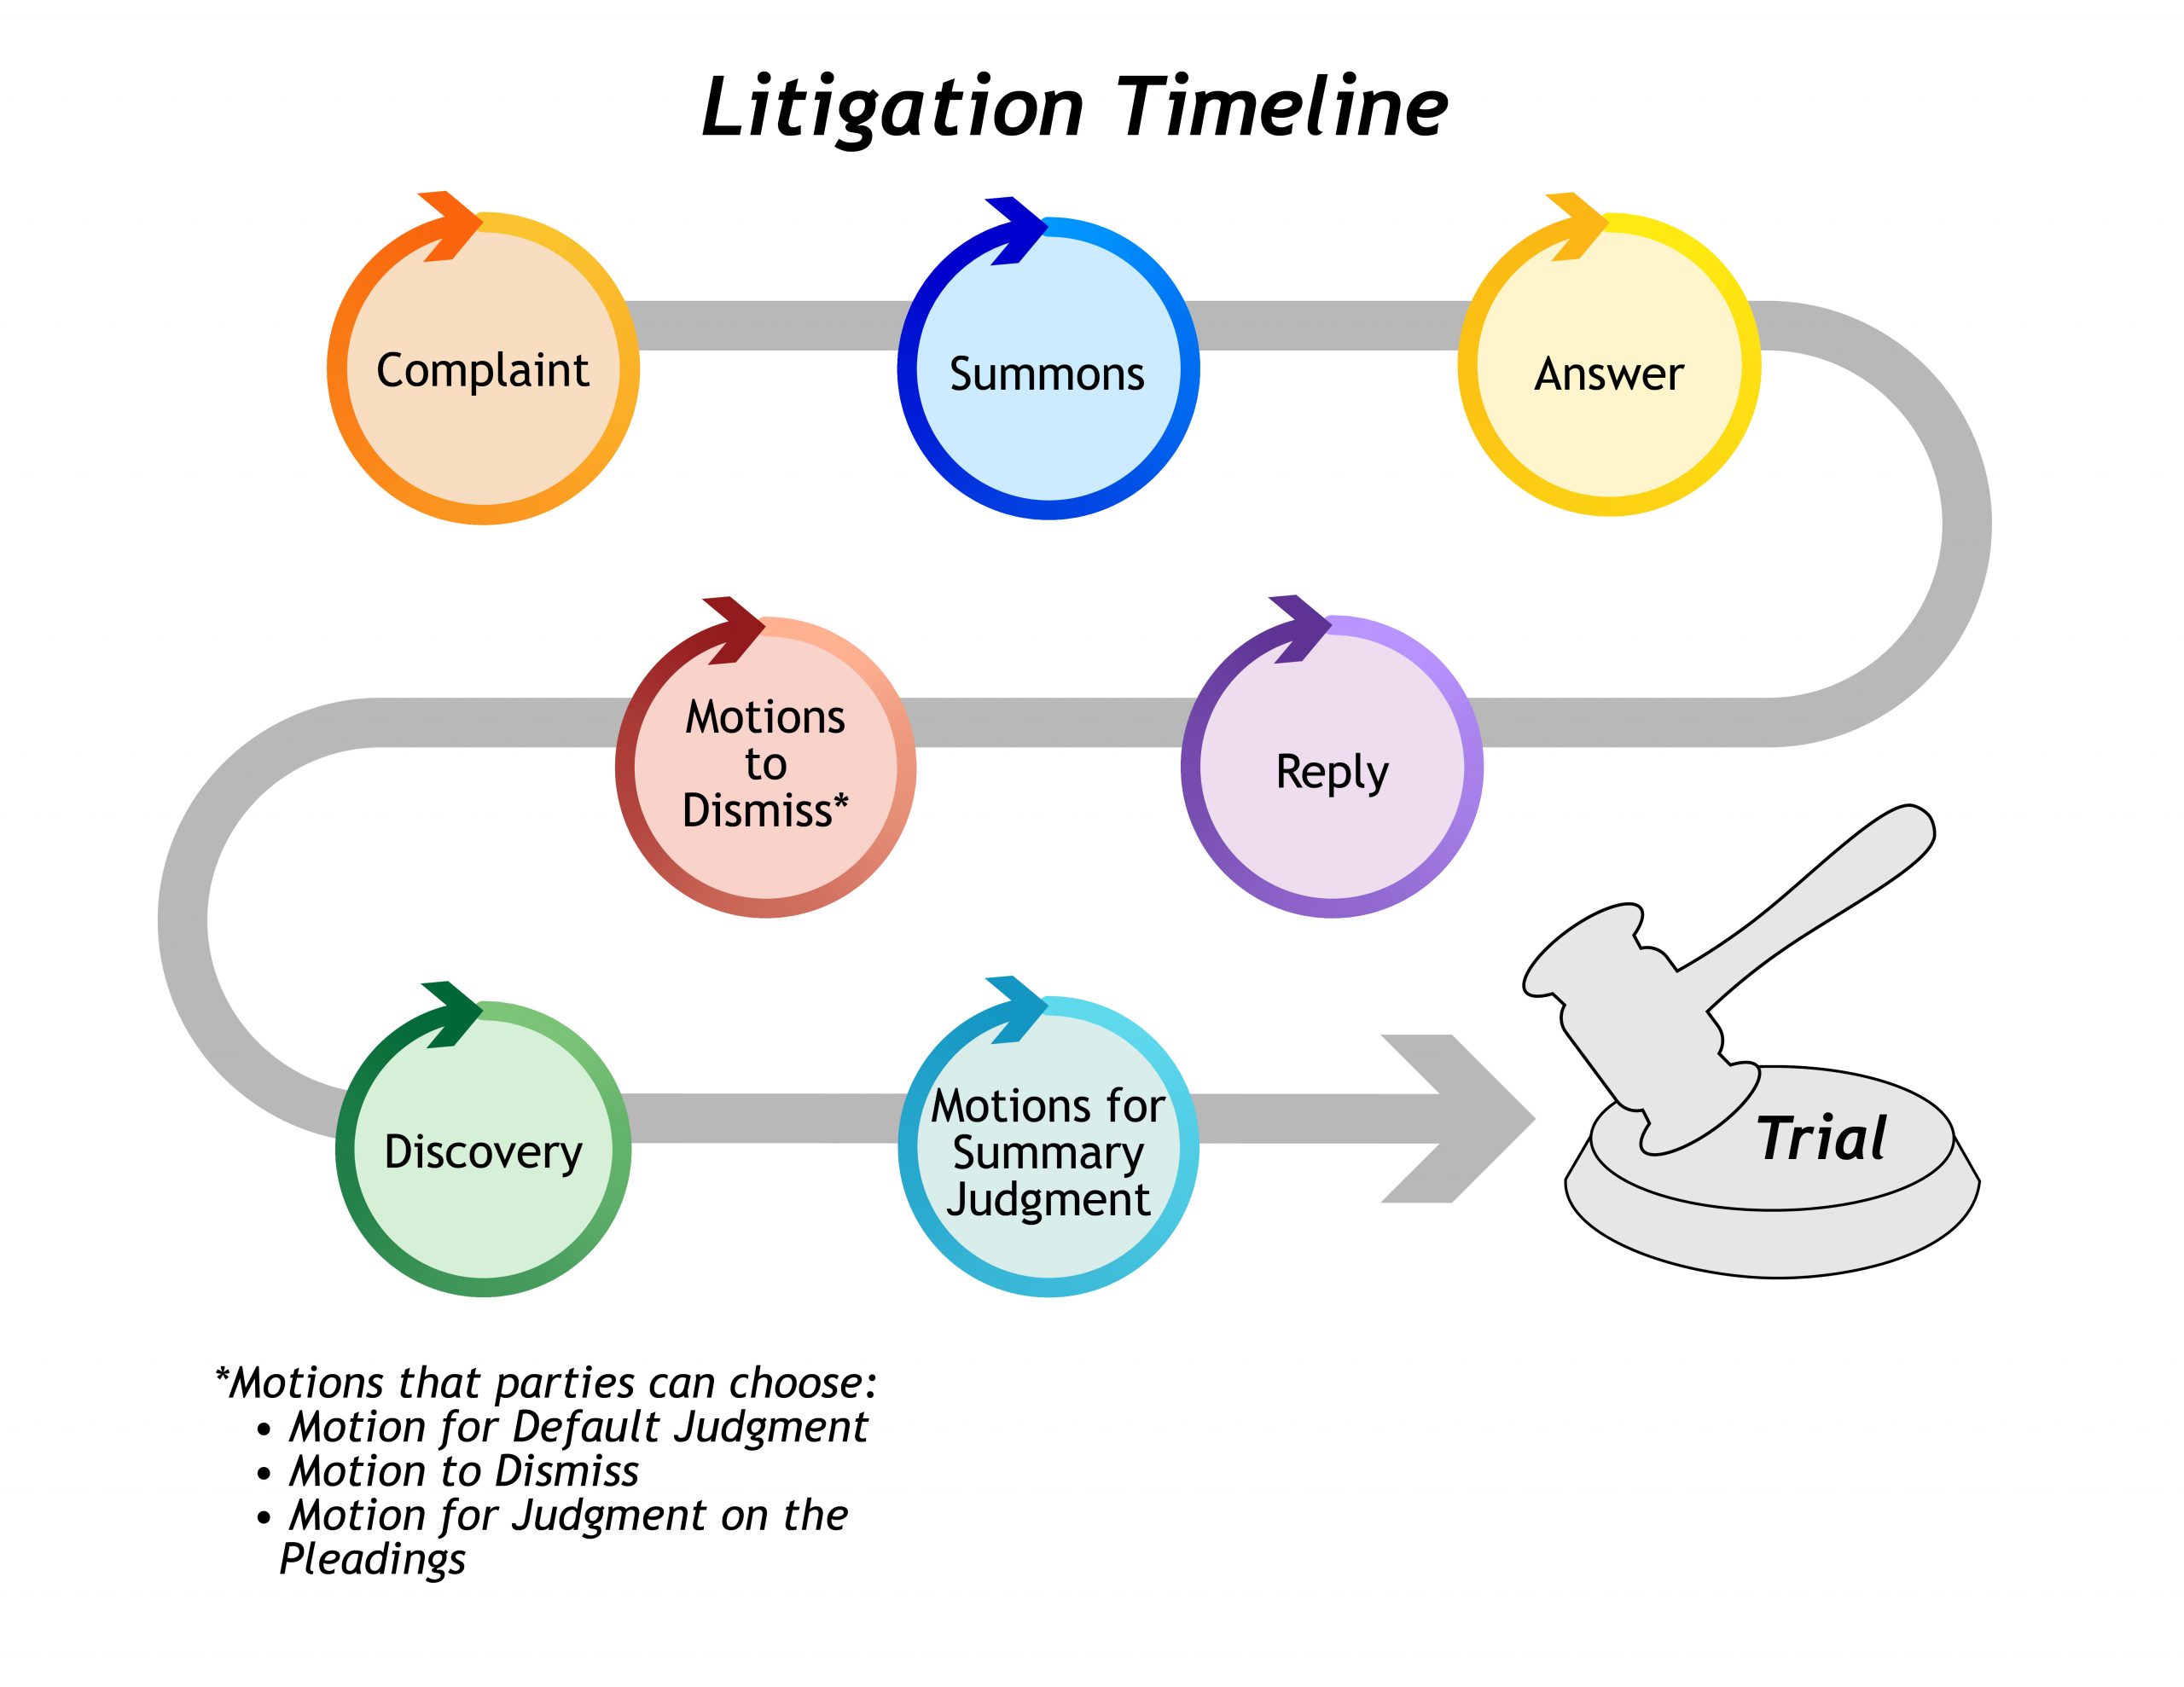 Litigation timeline from the legal complaint through trial